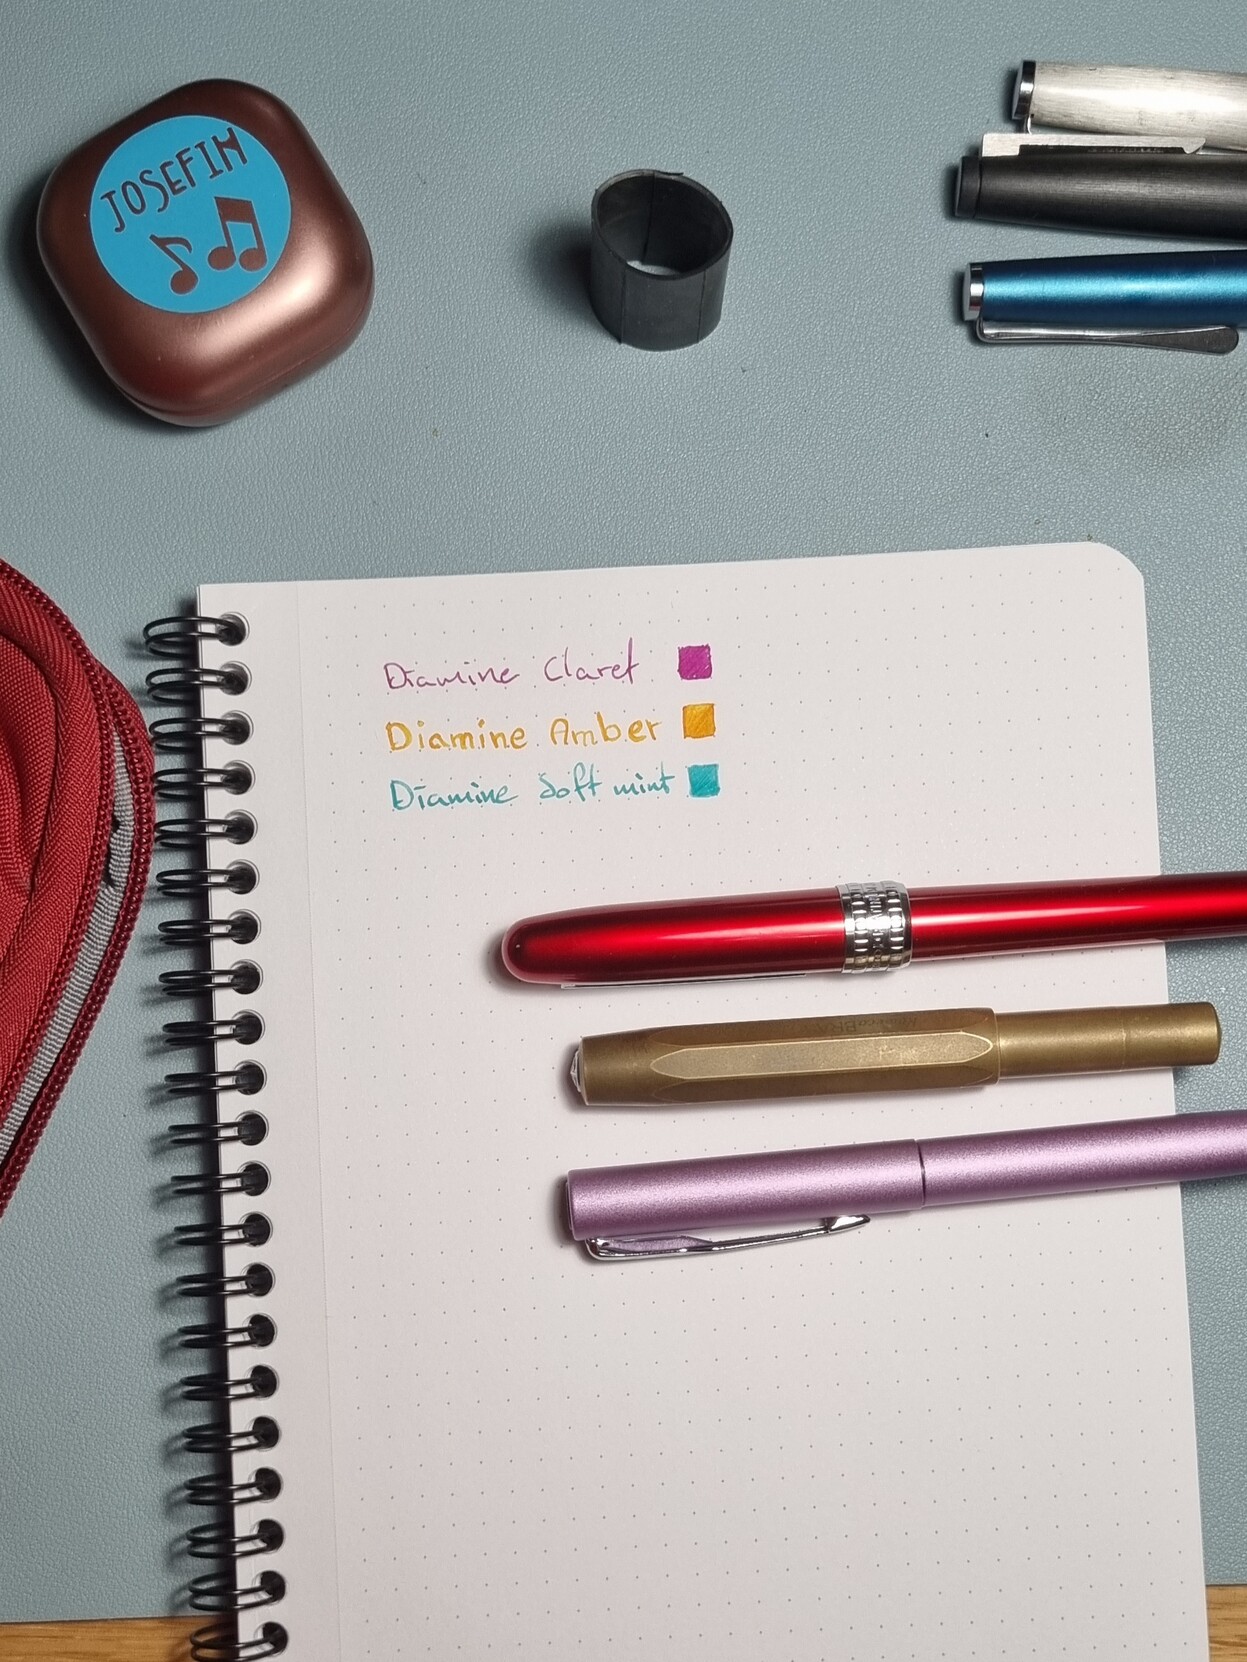 A somewhat arranged picrure of a notepad with some thinga strewn around. On the note pad it says "Diamine Claret" "Diamine Amber" and "Diamine Soft mint". There are three pens coresponding to the different inks.